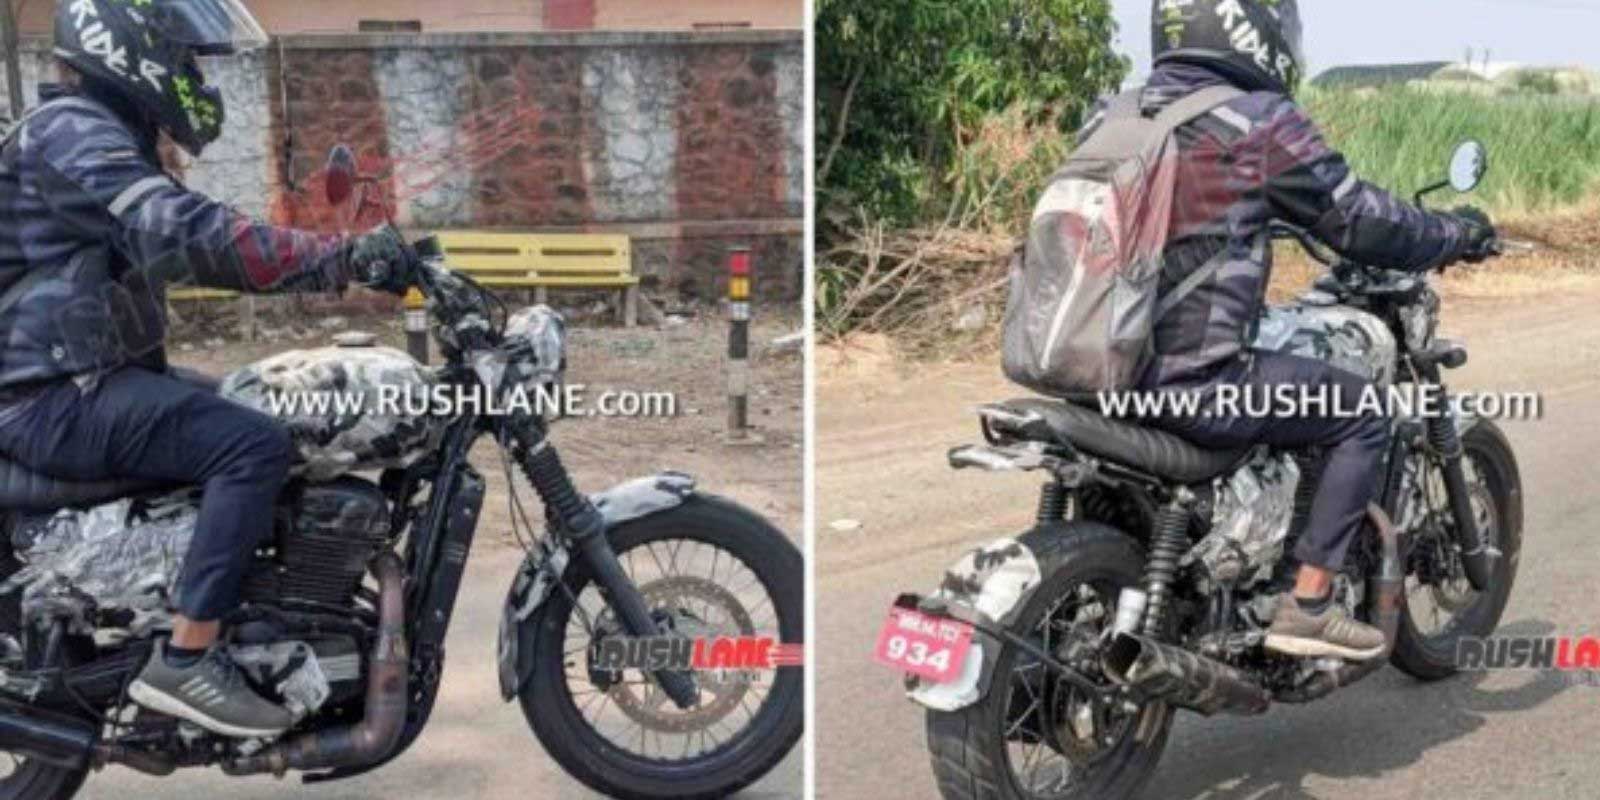 Jawa Scrambler 300 Spied Or Is It The New Yezdi Cb350 Rs Re Hunter Rival